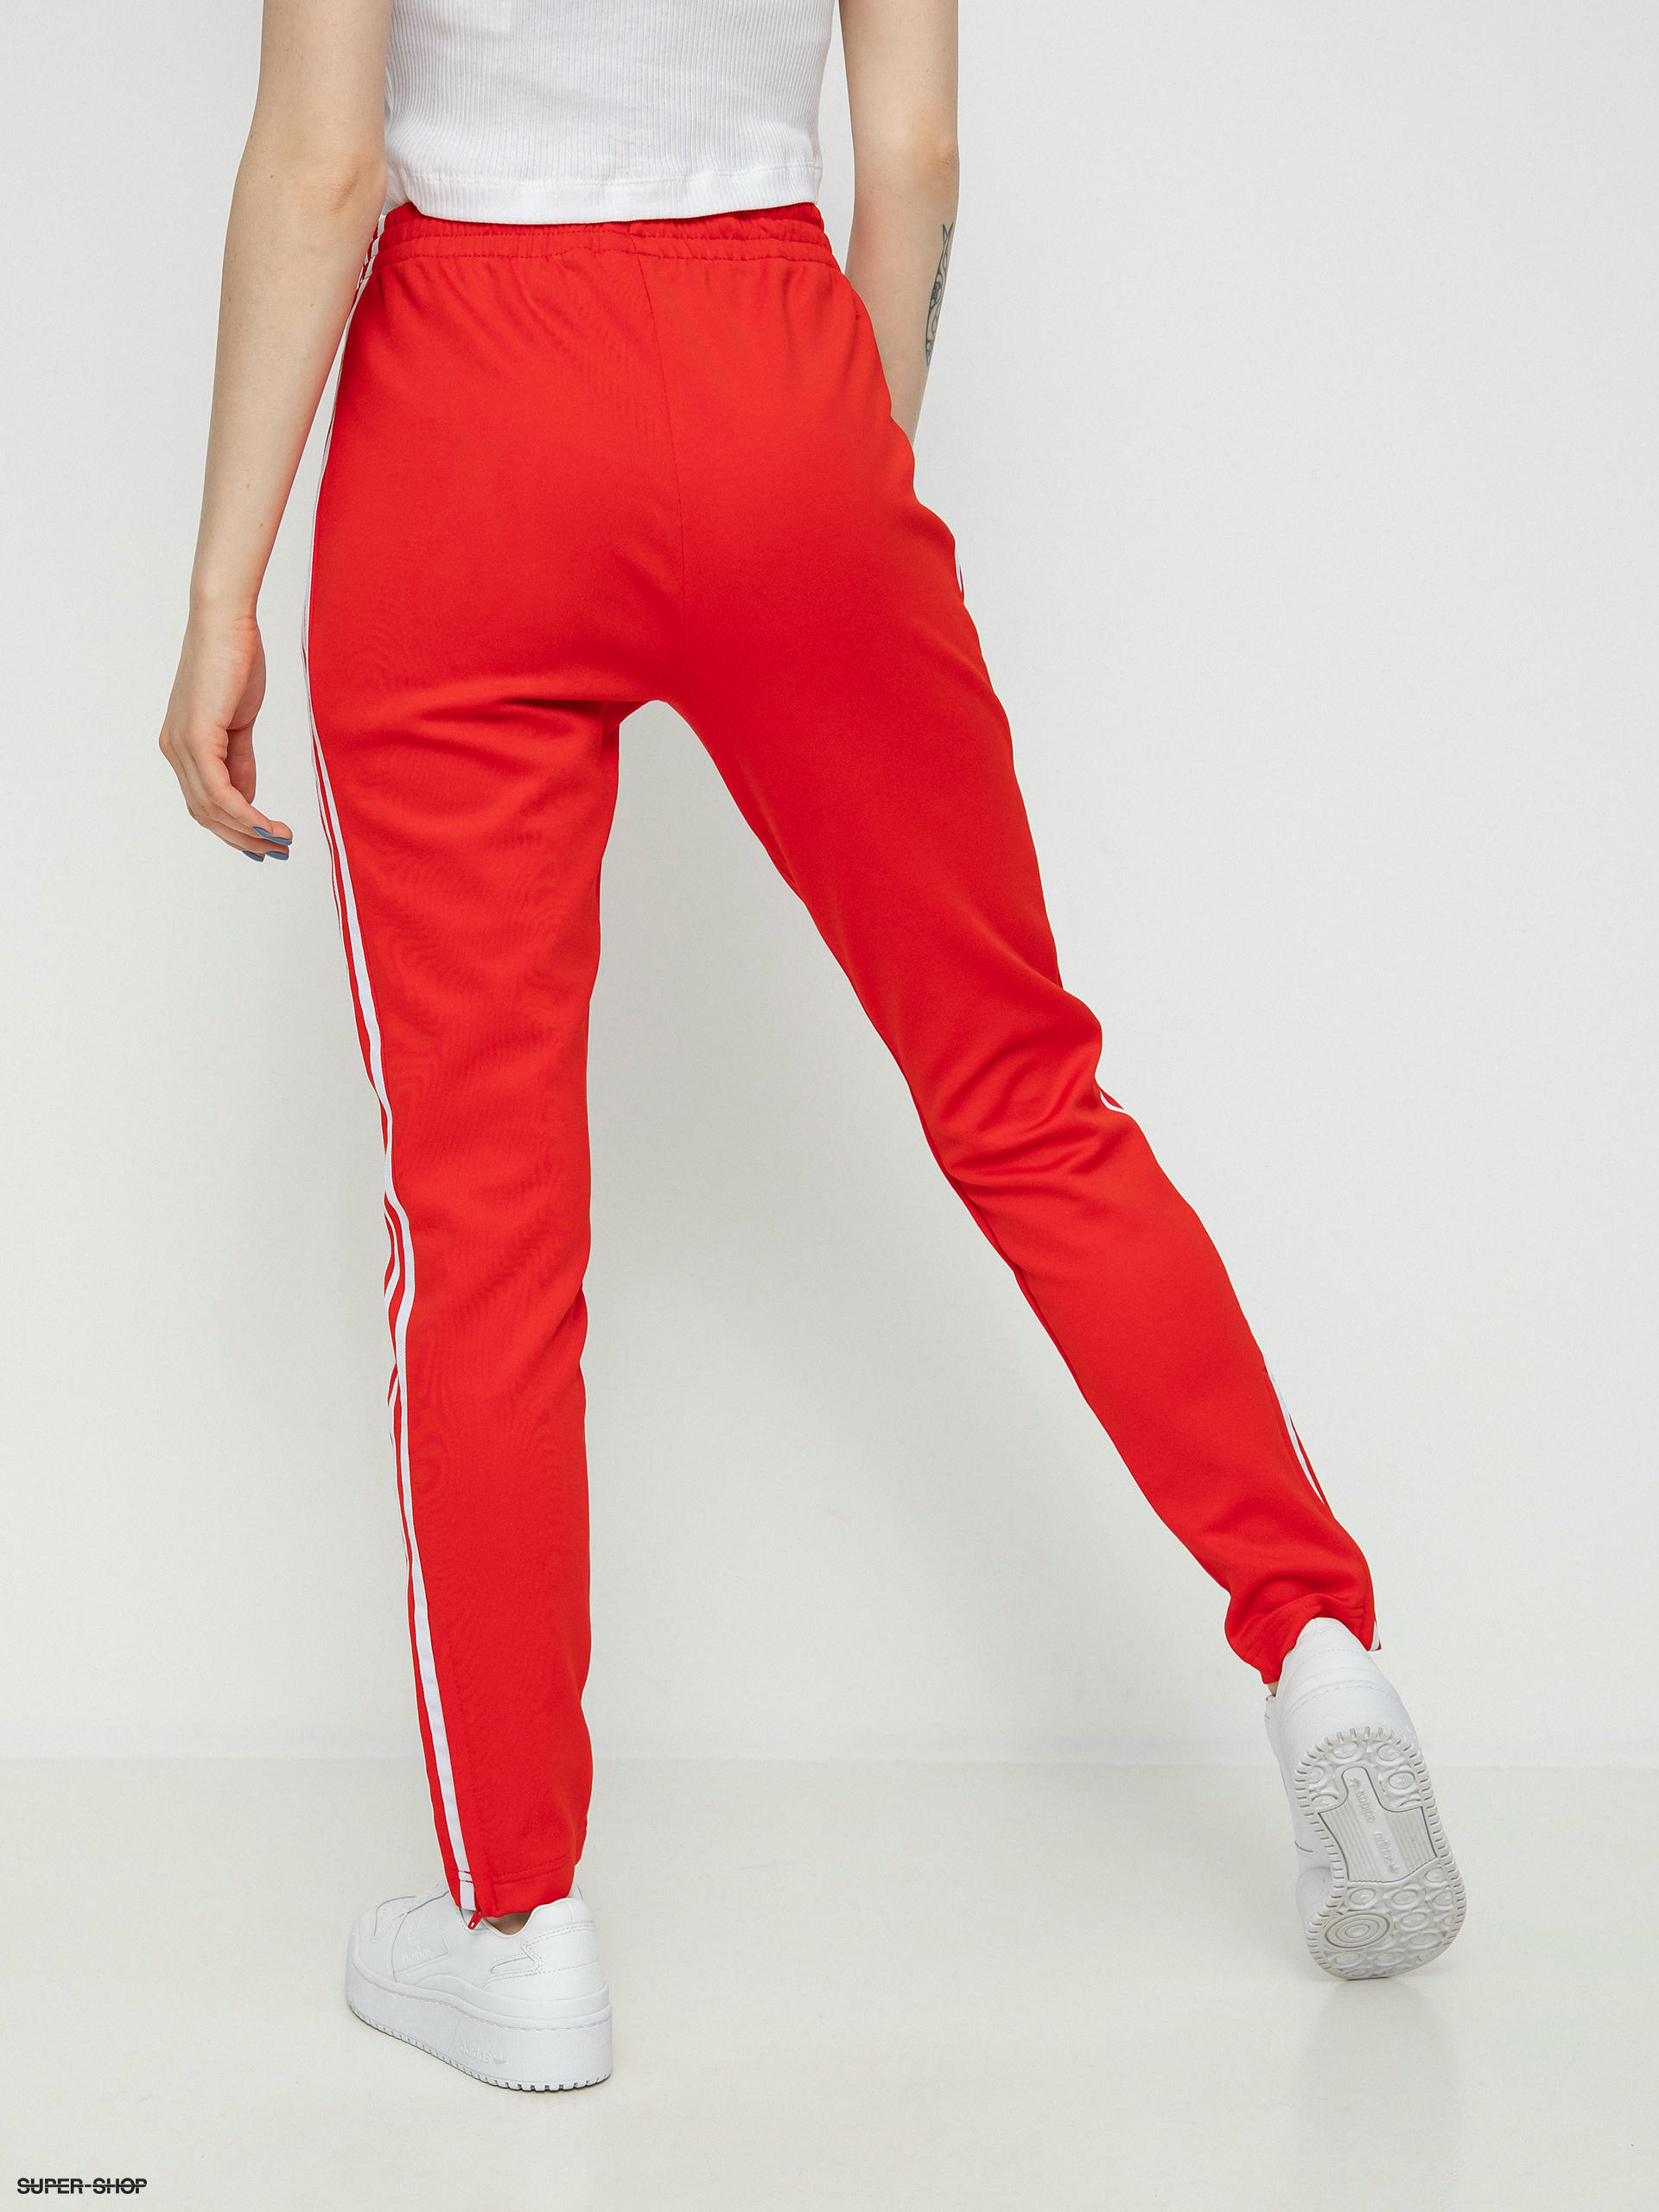 Buy adidas Originals Womens Street Track Pants Mystery Red